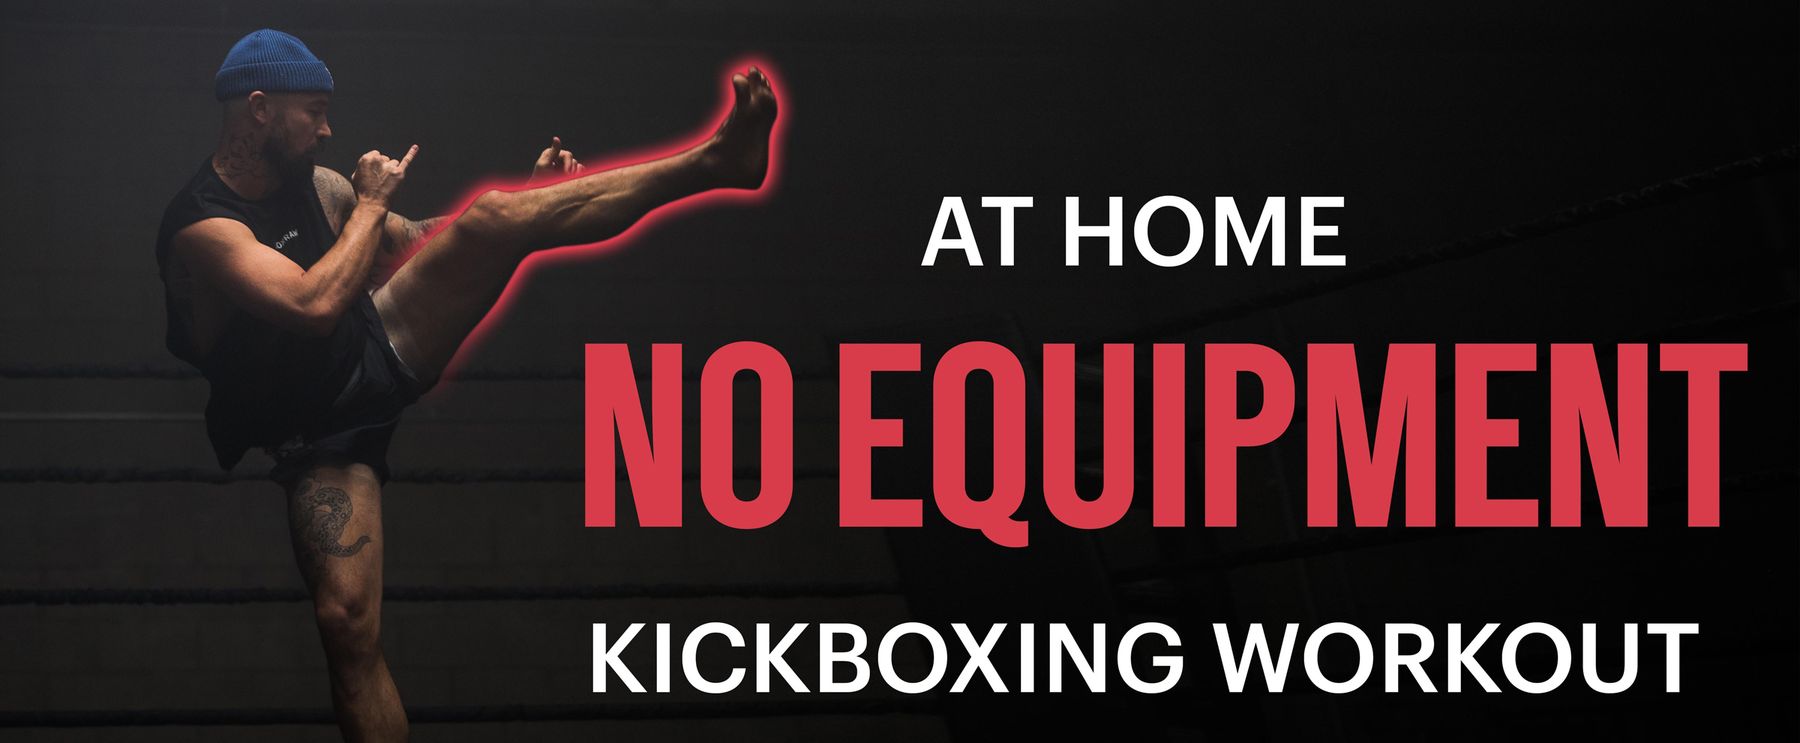 15 Minute Bodyweight Workout For Kickboxing